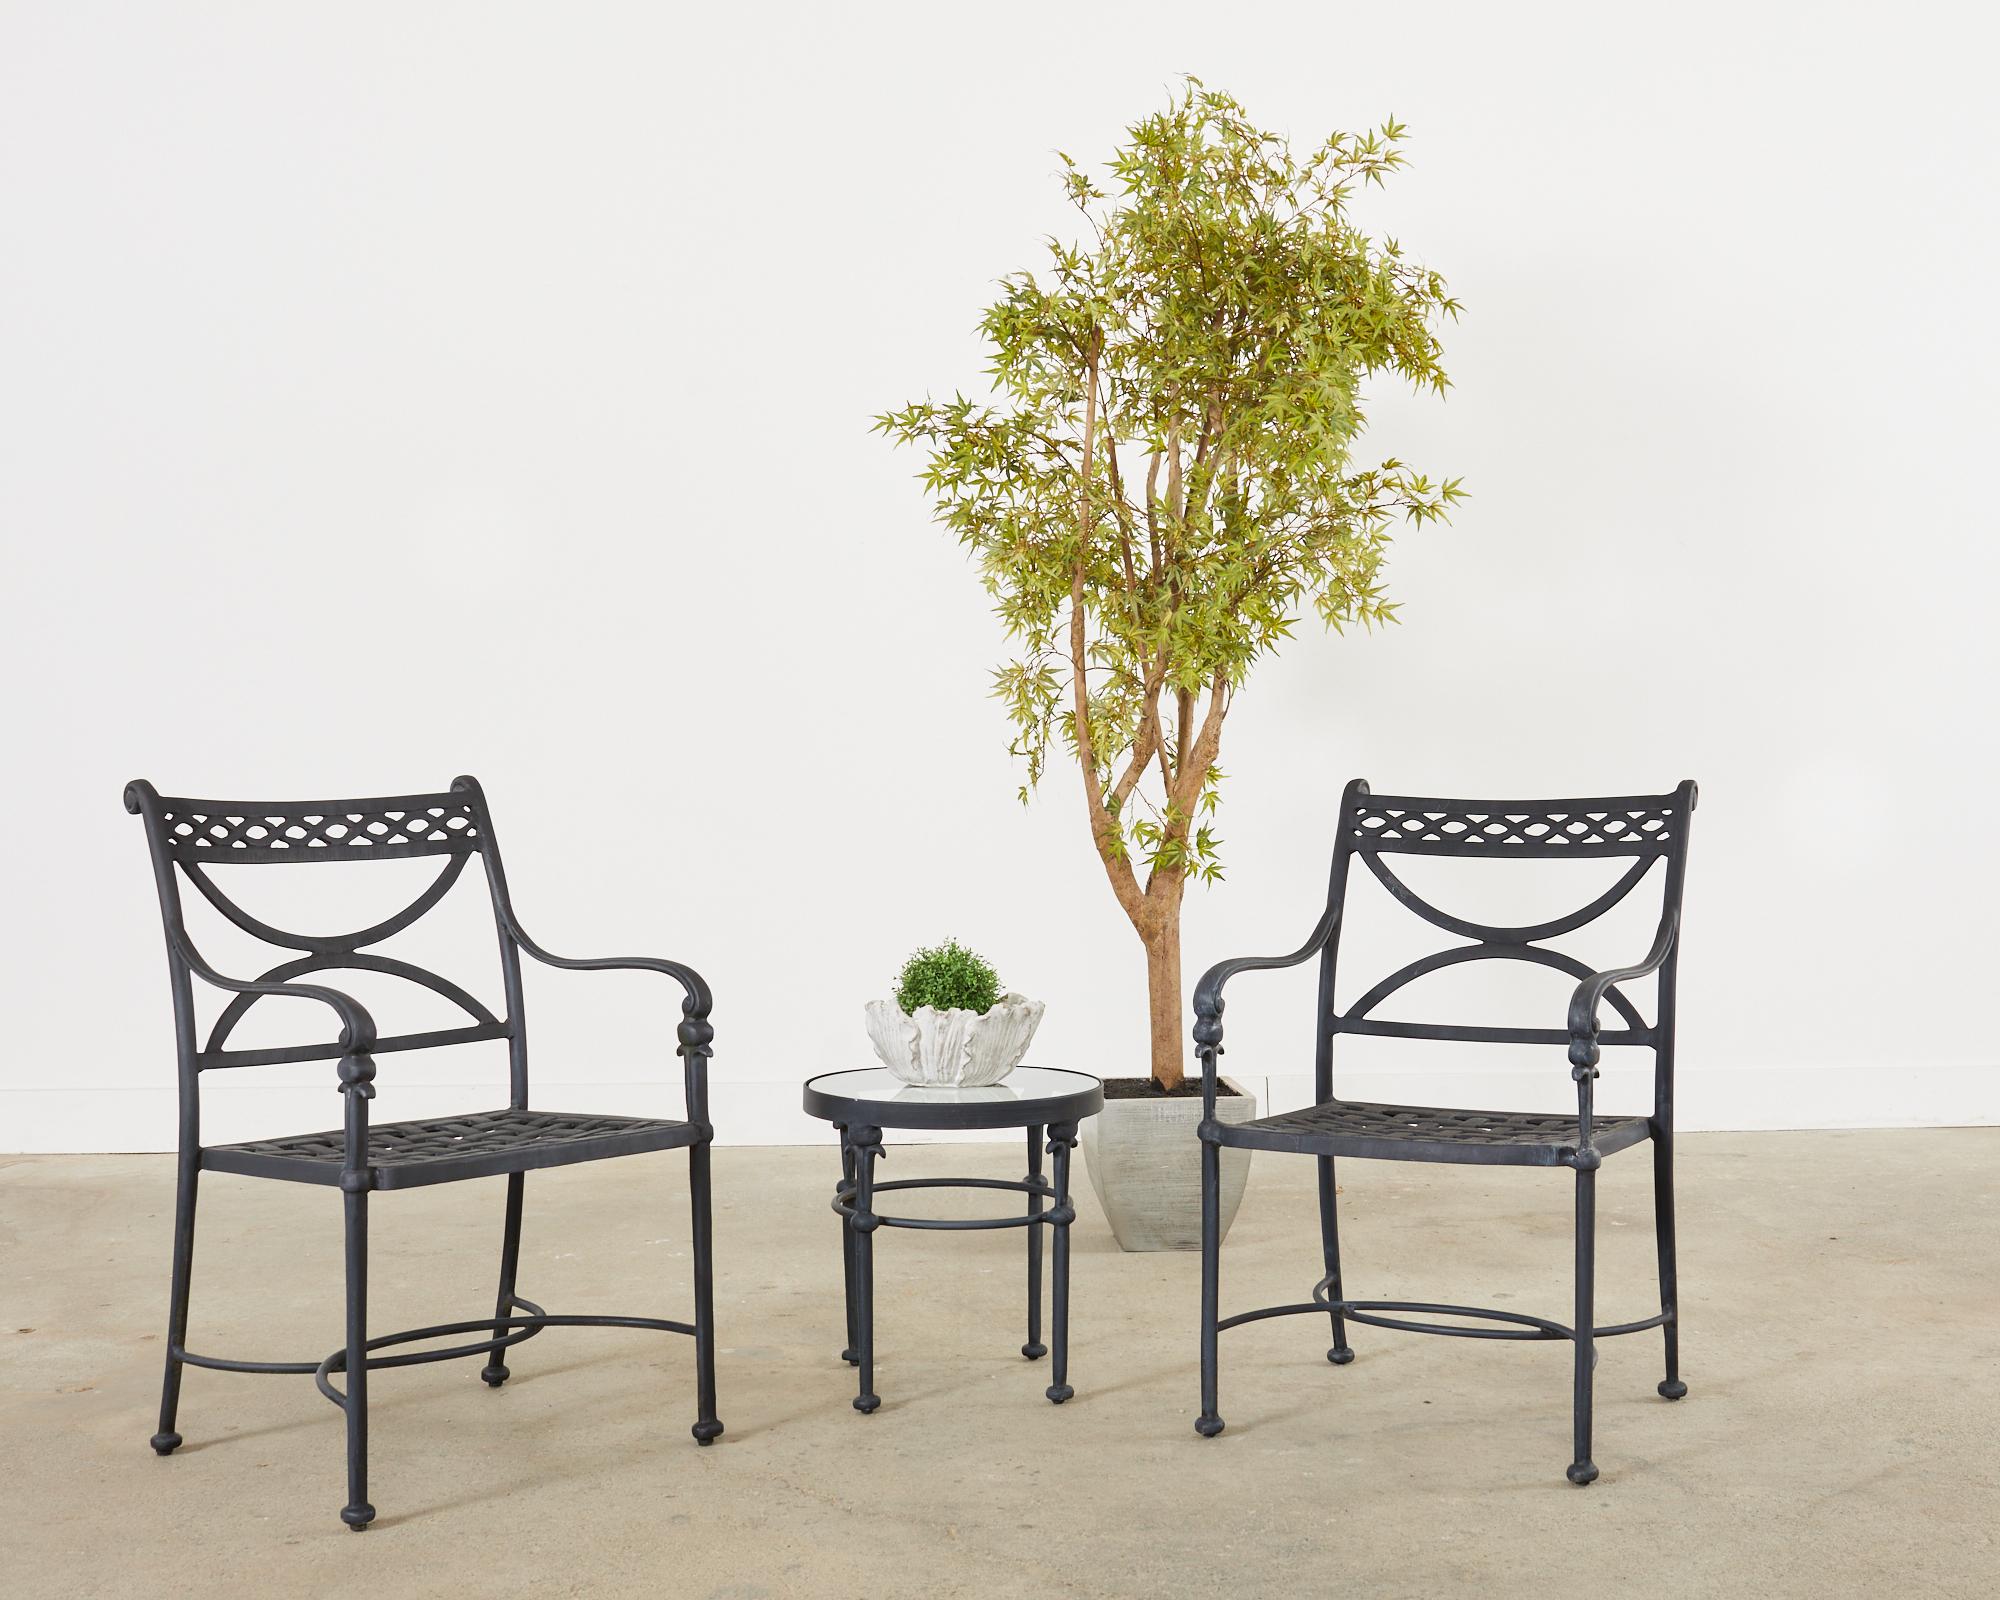 Distinctive pair of round patio and garden drink tables made in the manner and style of Alberto Giacometti. The tables features a hand-crafted wrought aluminum construction with an intentionally aged, ebonized dark finish. The top are inset with a